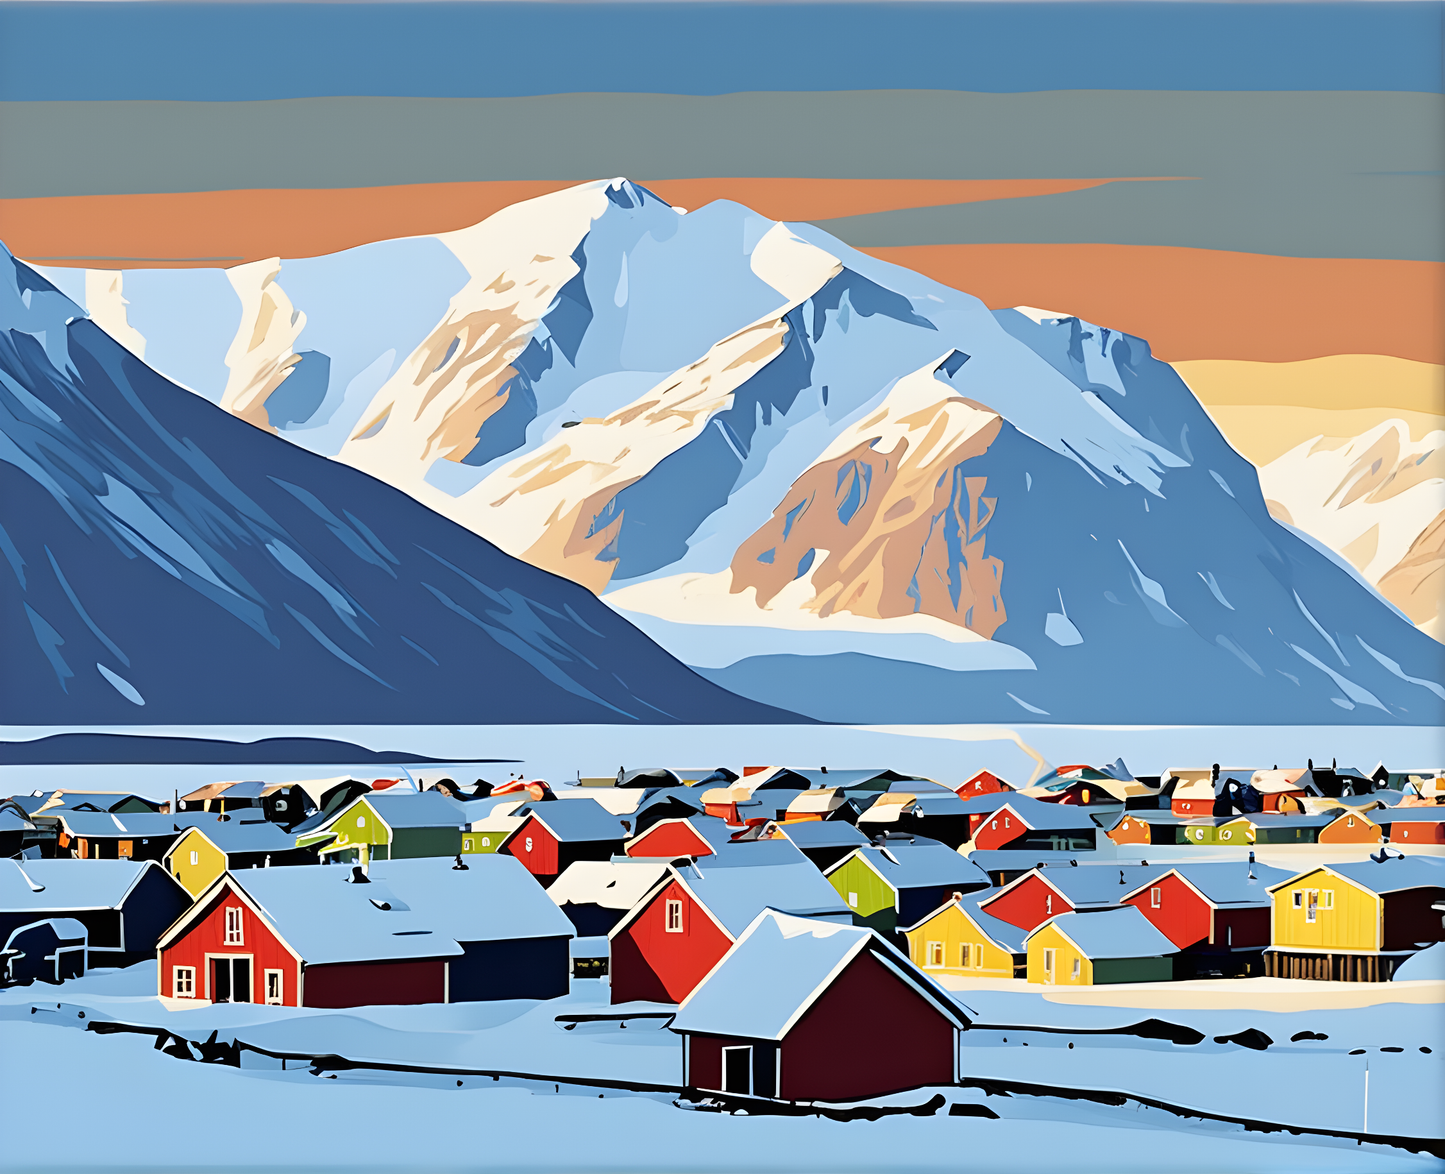 Amazing Places OD (473) - Svalbard, Norway - Van-Go Paint-By-Number Kit